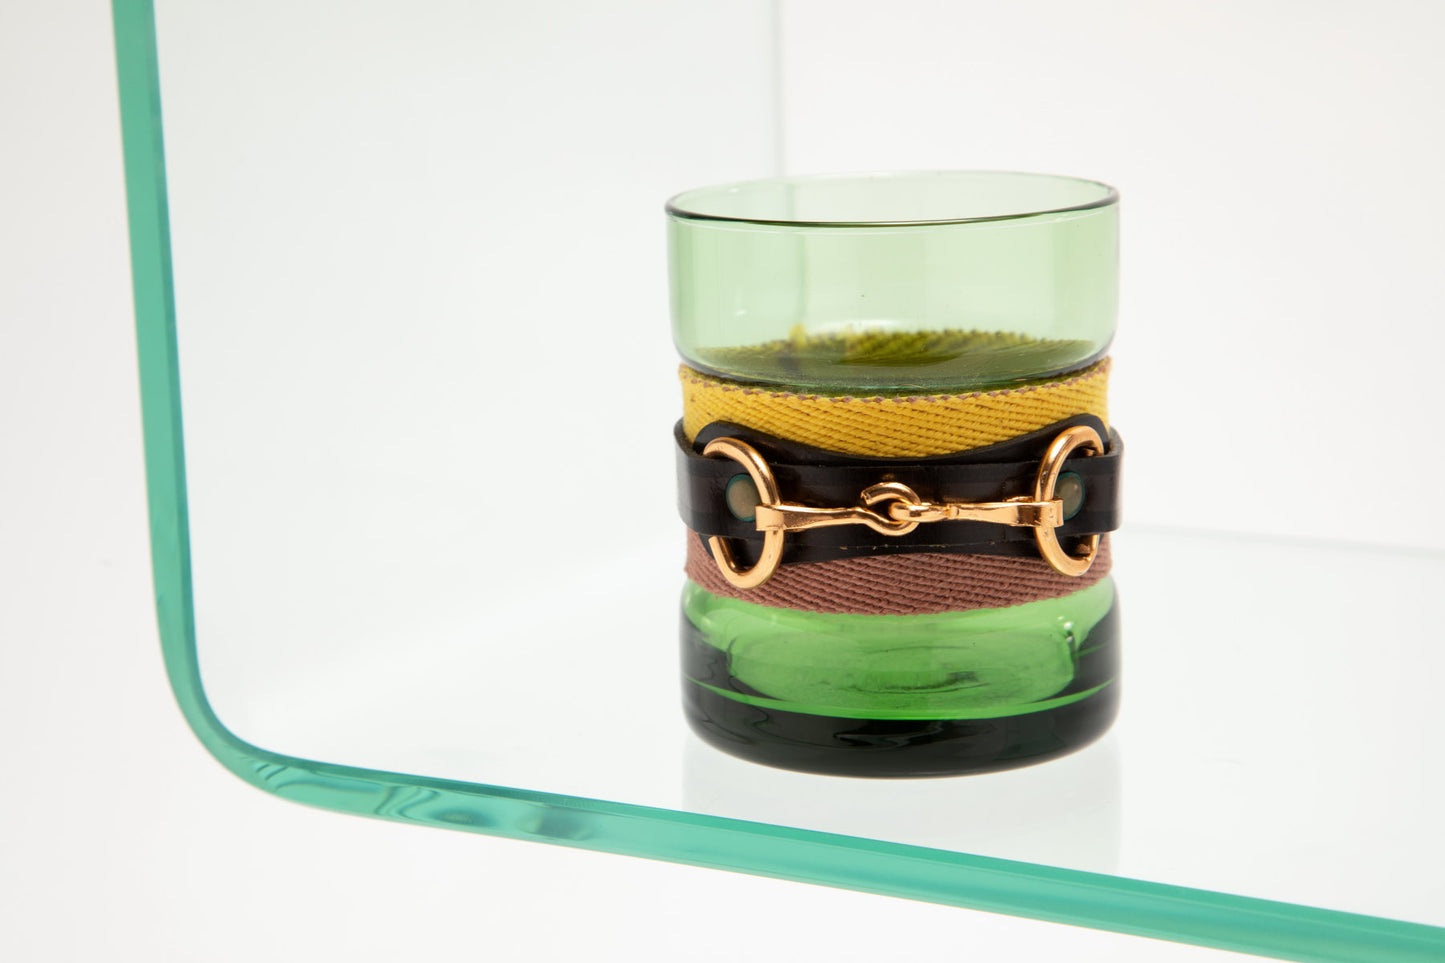 12-piece green glass tumbler set from the 70s